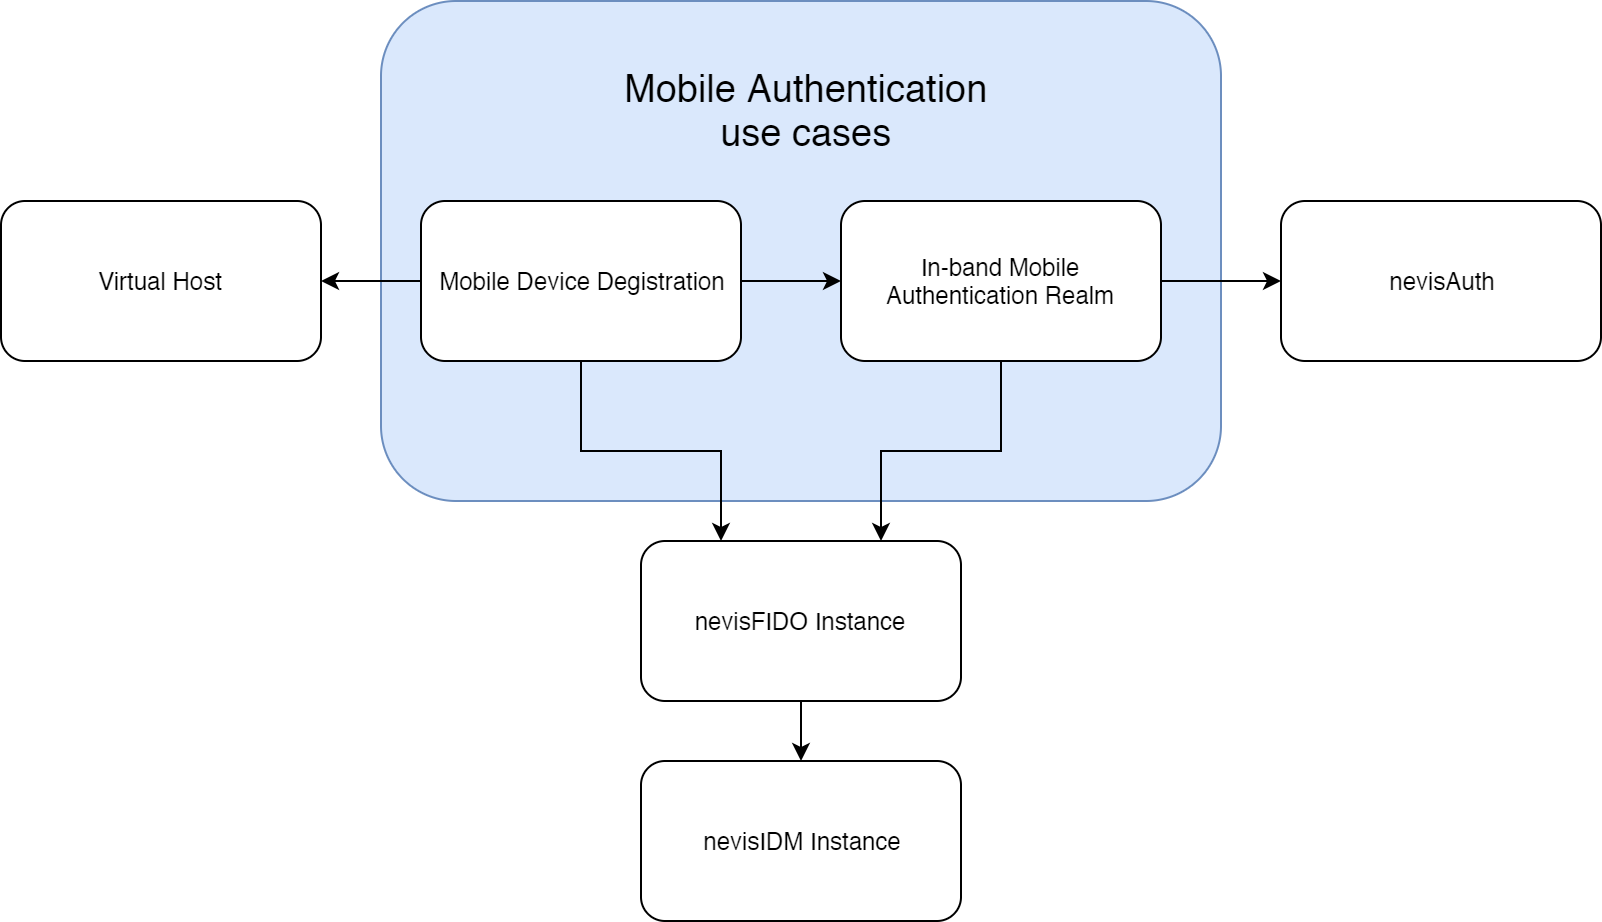 The Mobile Device Deregistration pattern and its connections